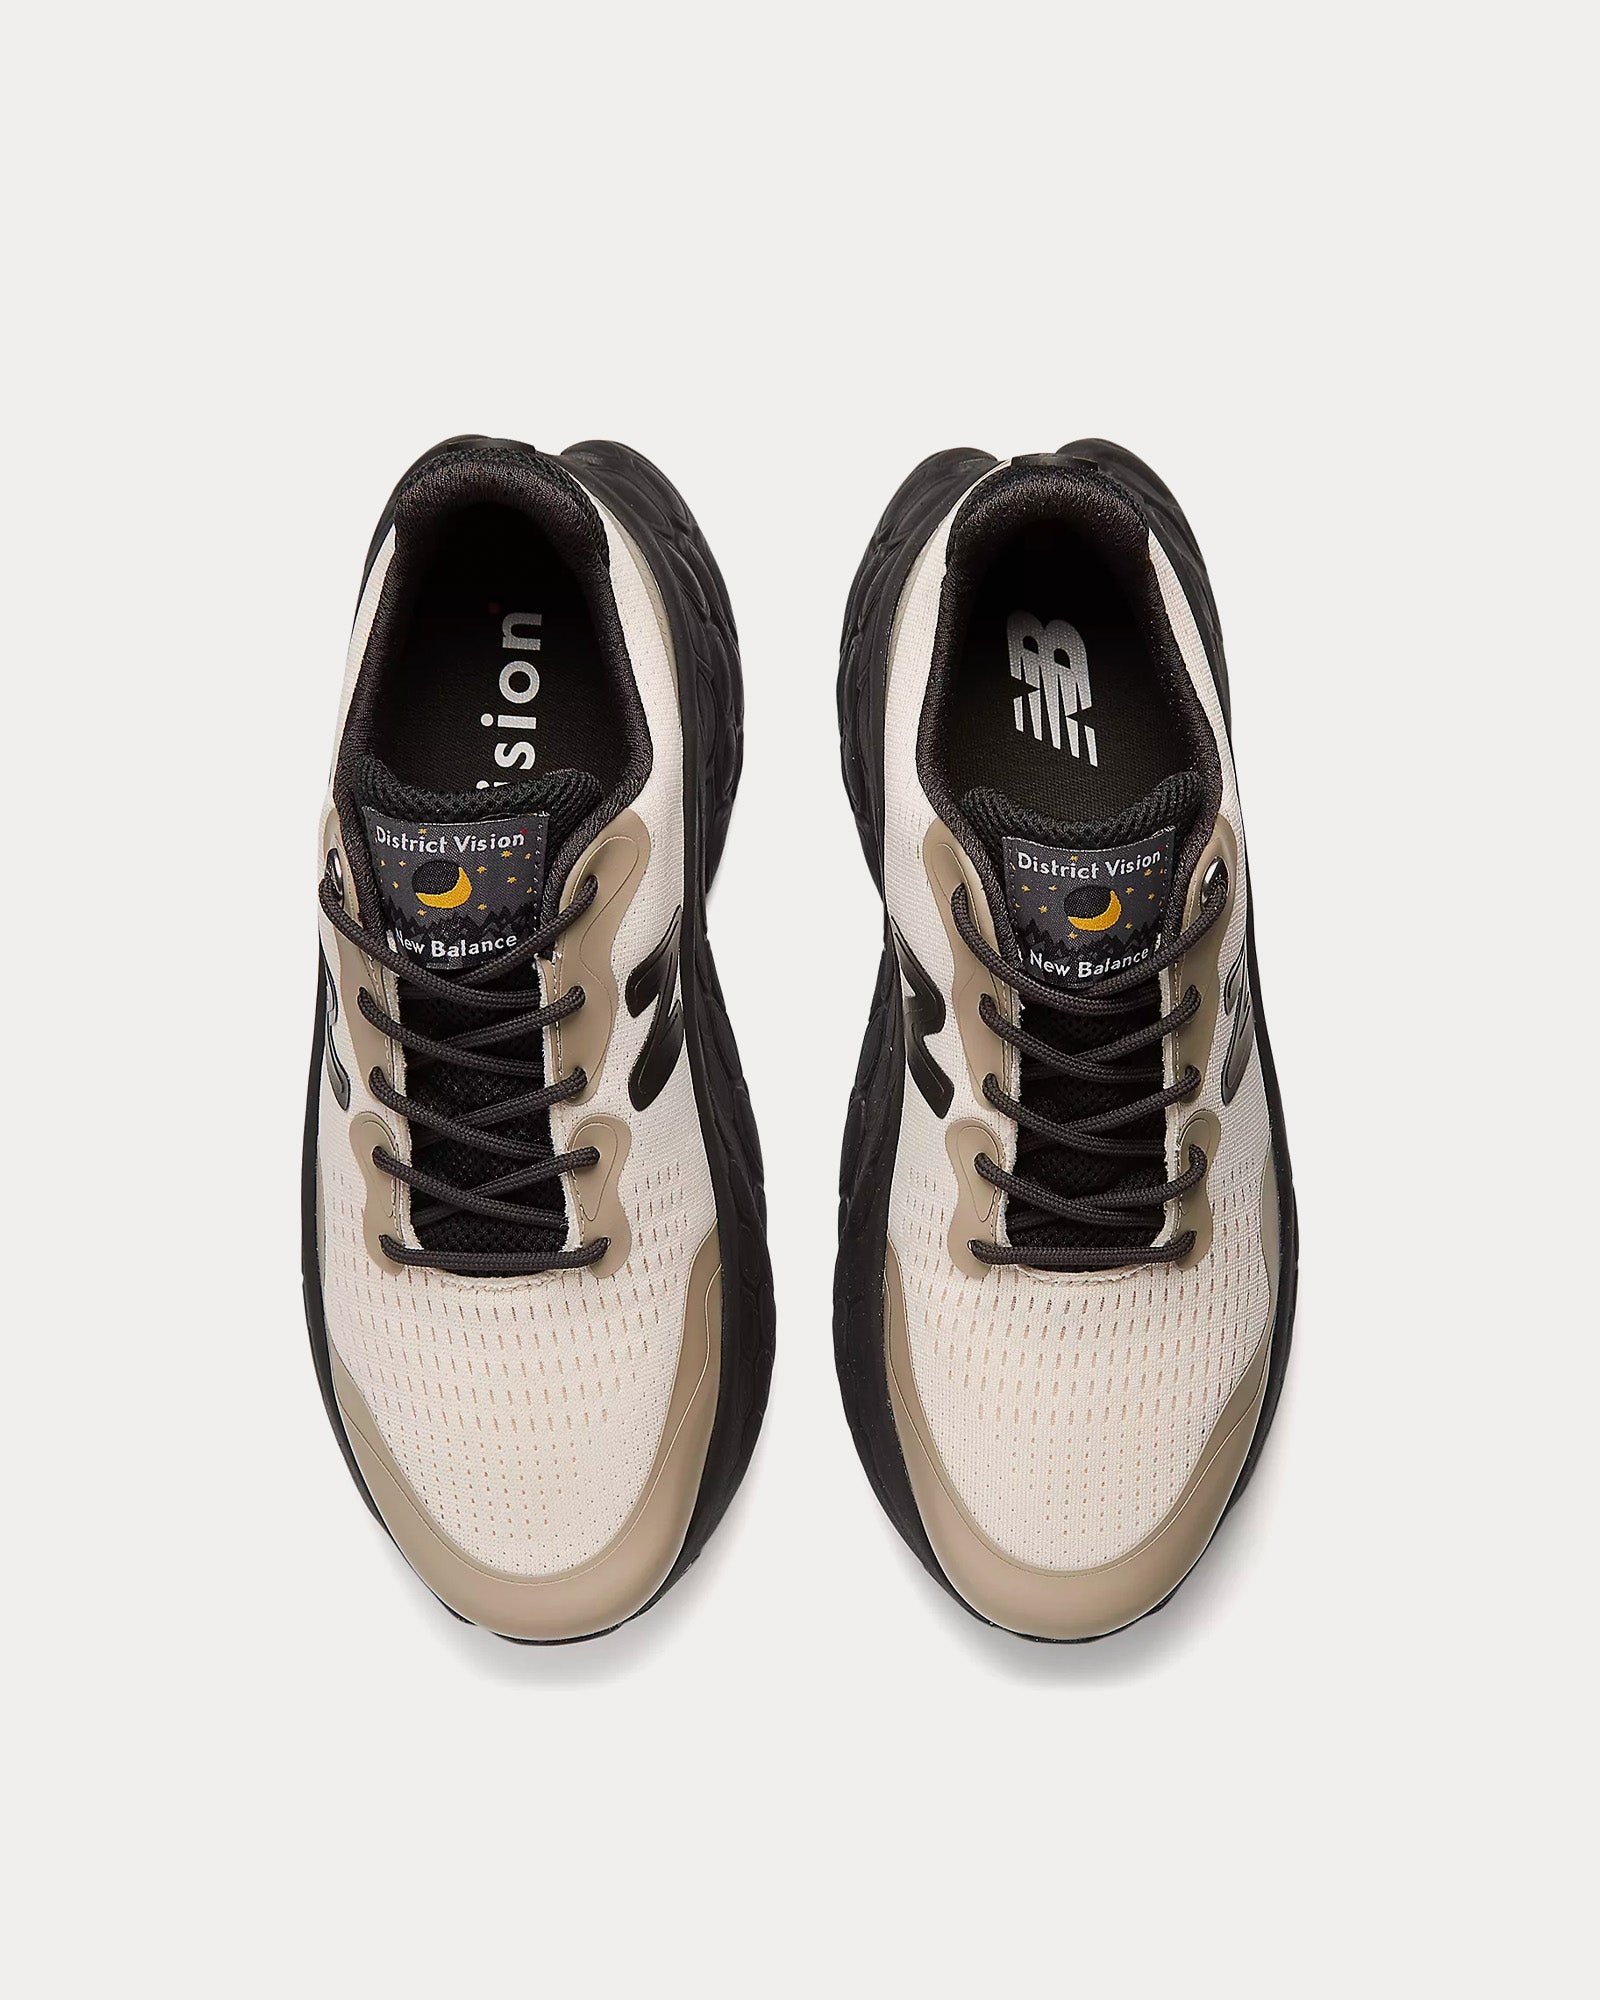 New Balance x District Vision - Fresh Foam More Trail Jet Stream / Taupe / Jet Black Running Shoes